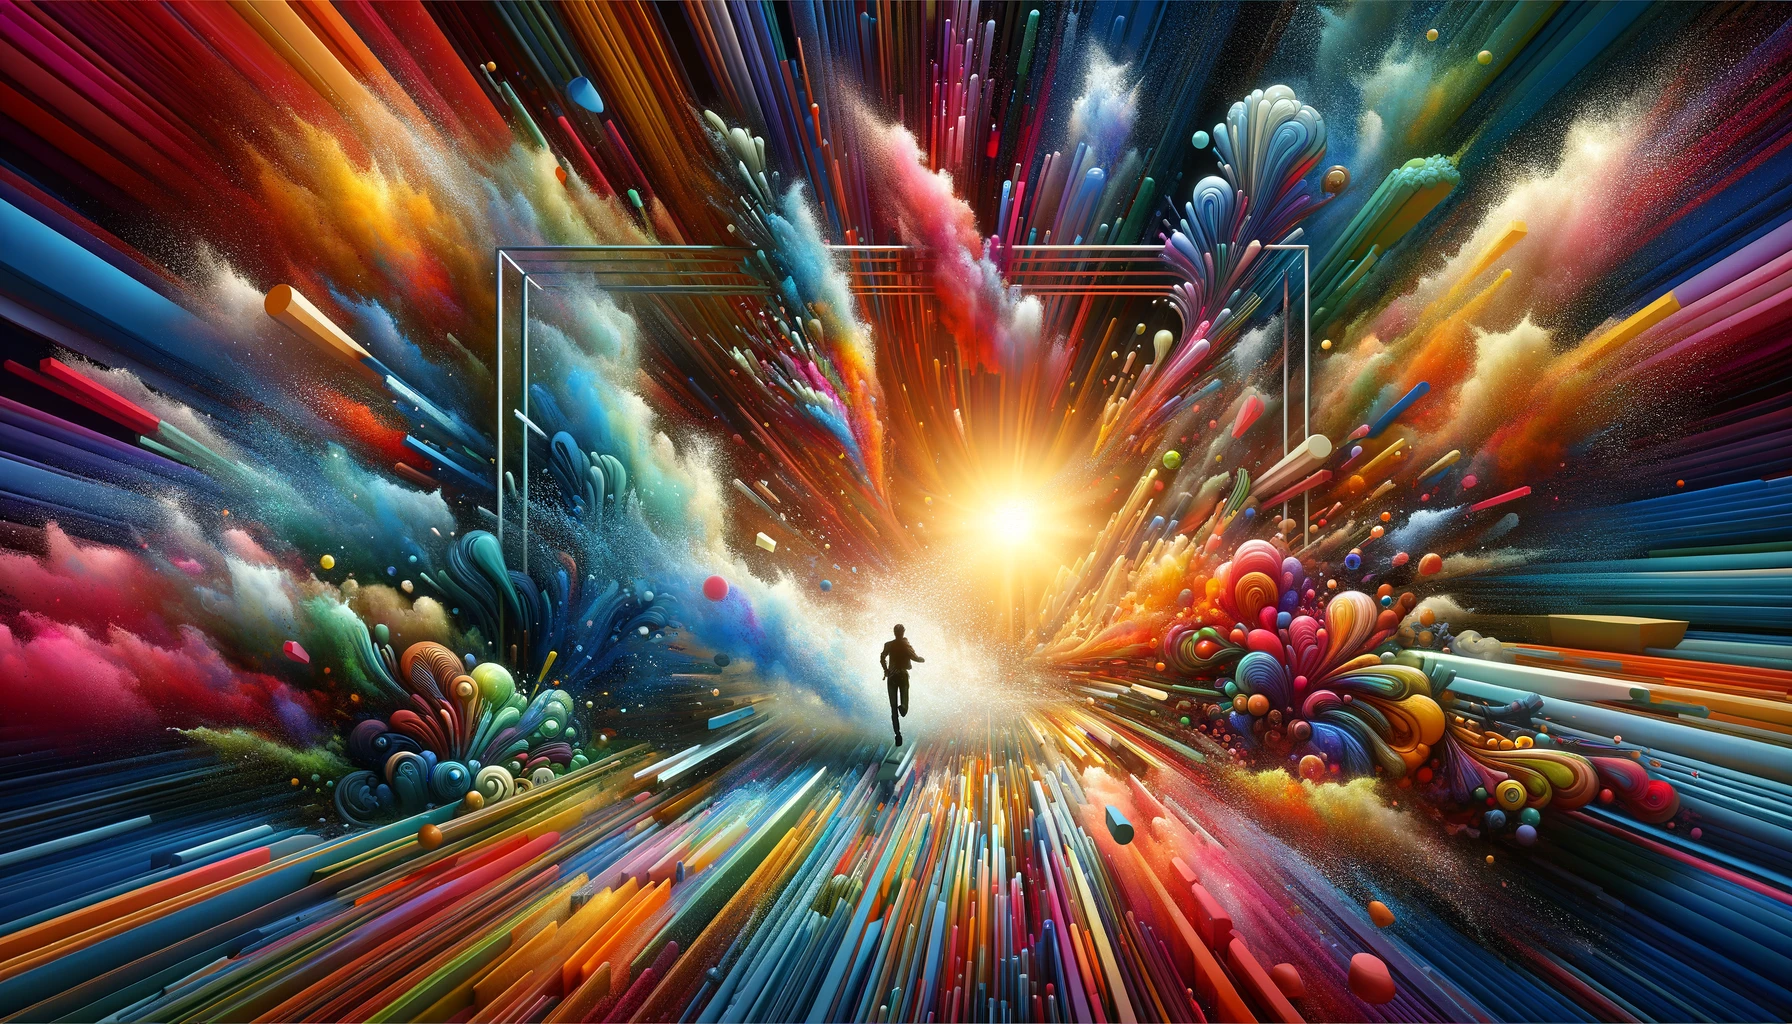 A dynamic and colorful breaking through conventional boundaries, depicting a figure advancing towards a radiant horizon beyond structured frames